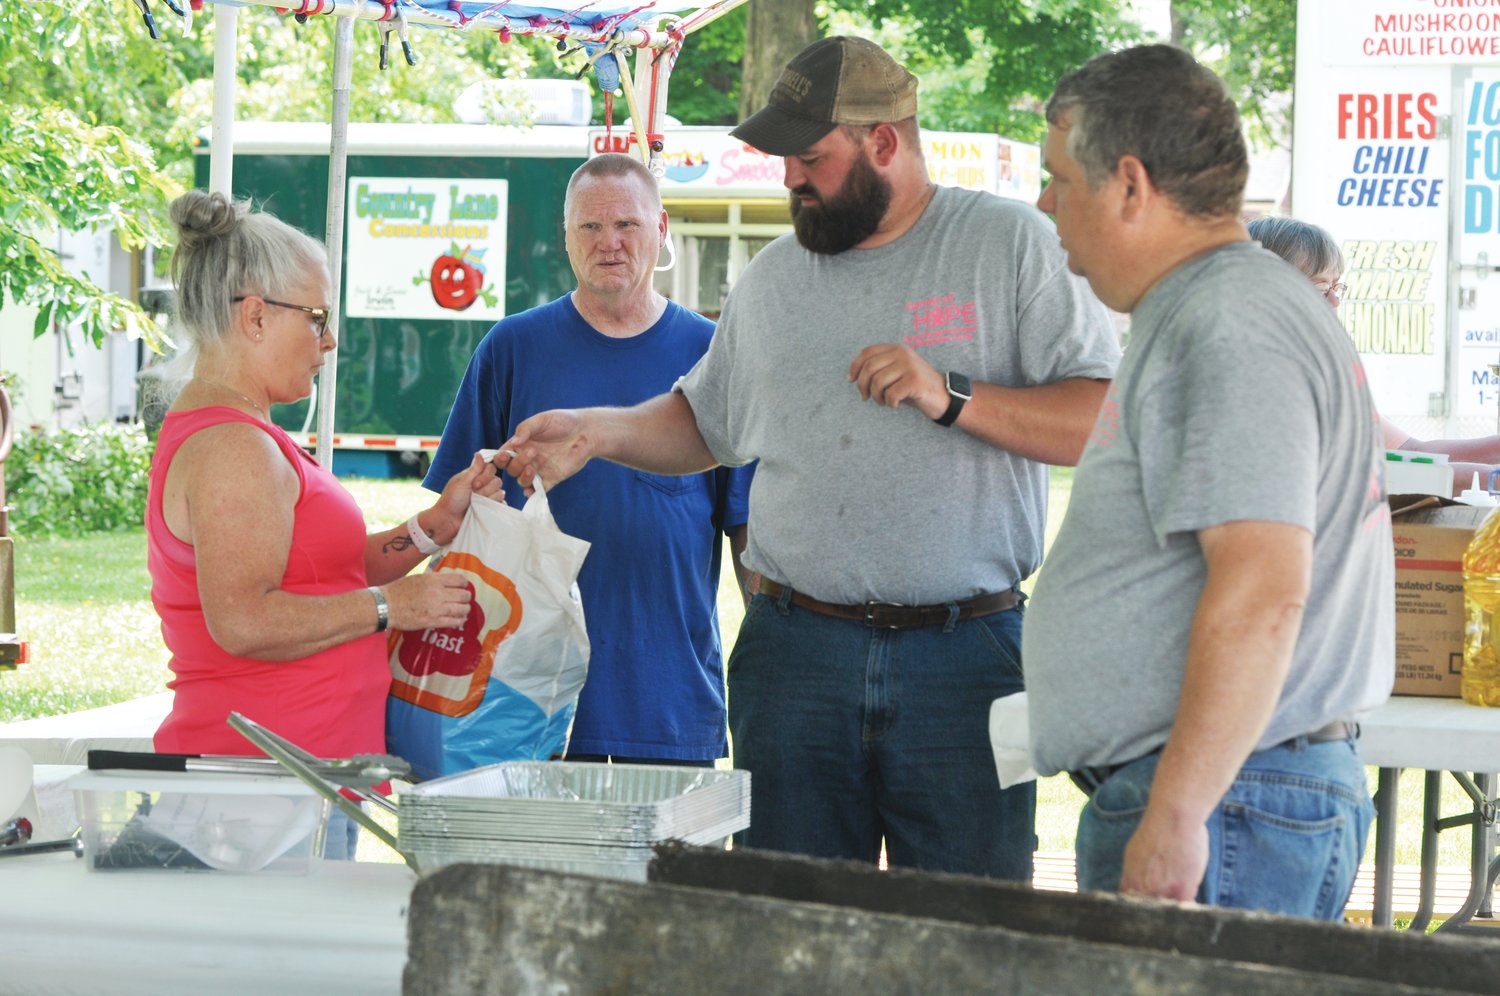 Members of cancer support group Journey of Hope set up a booth Thursday for the Strawberry Festival on the Lane Place grounds. The festival kicks off today.